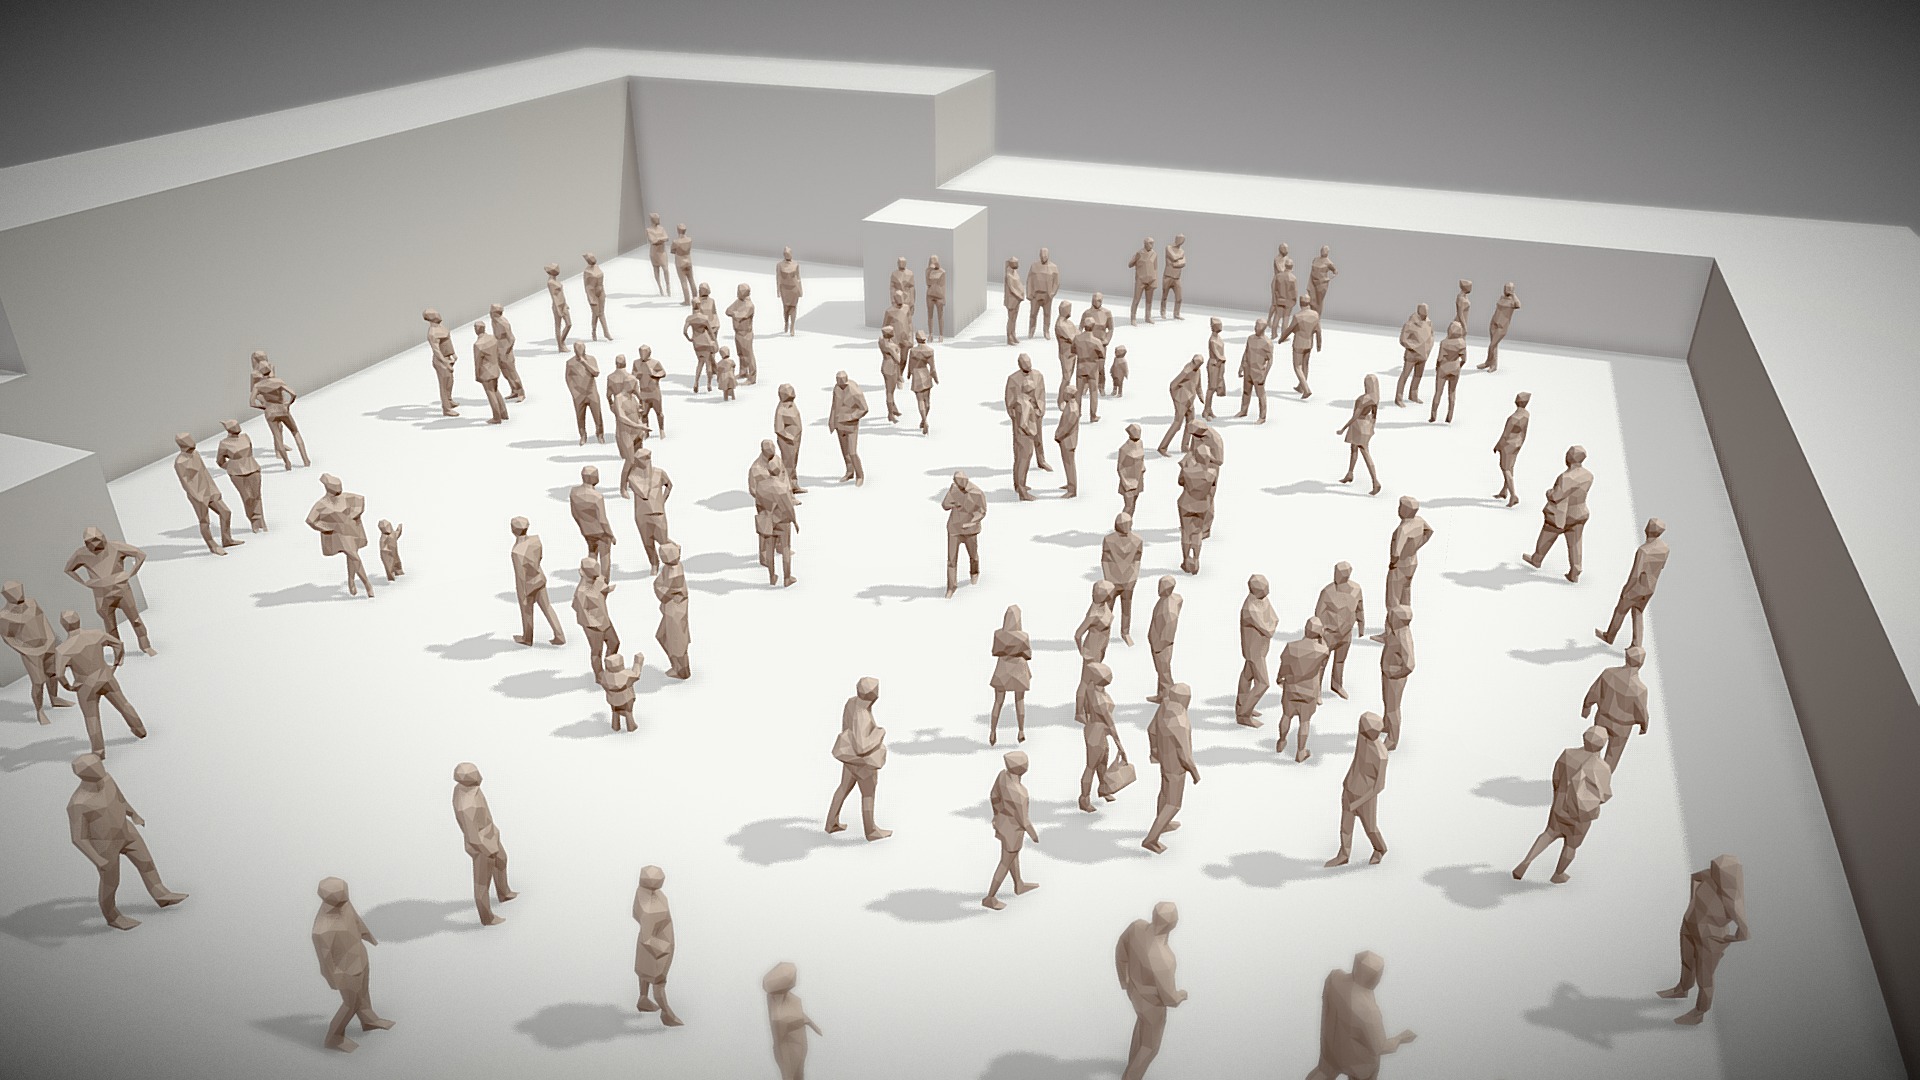 3D model Lowpoly People Crowd - This is a 3D model of the Lowpoly People Crowd. The 3D model is about a group of people in a large room.